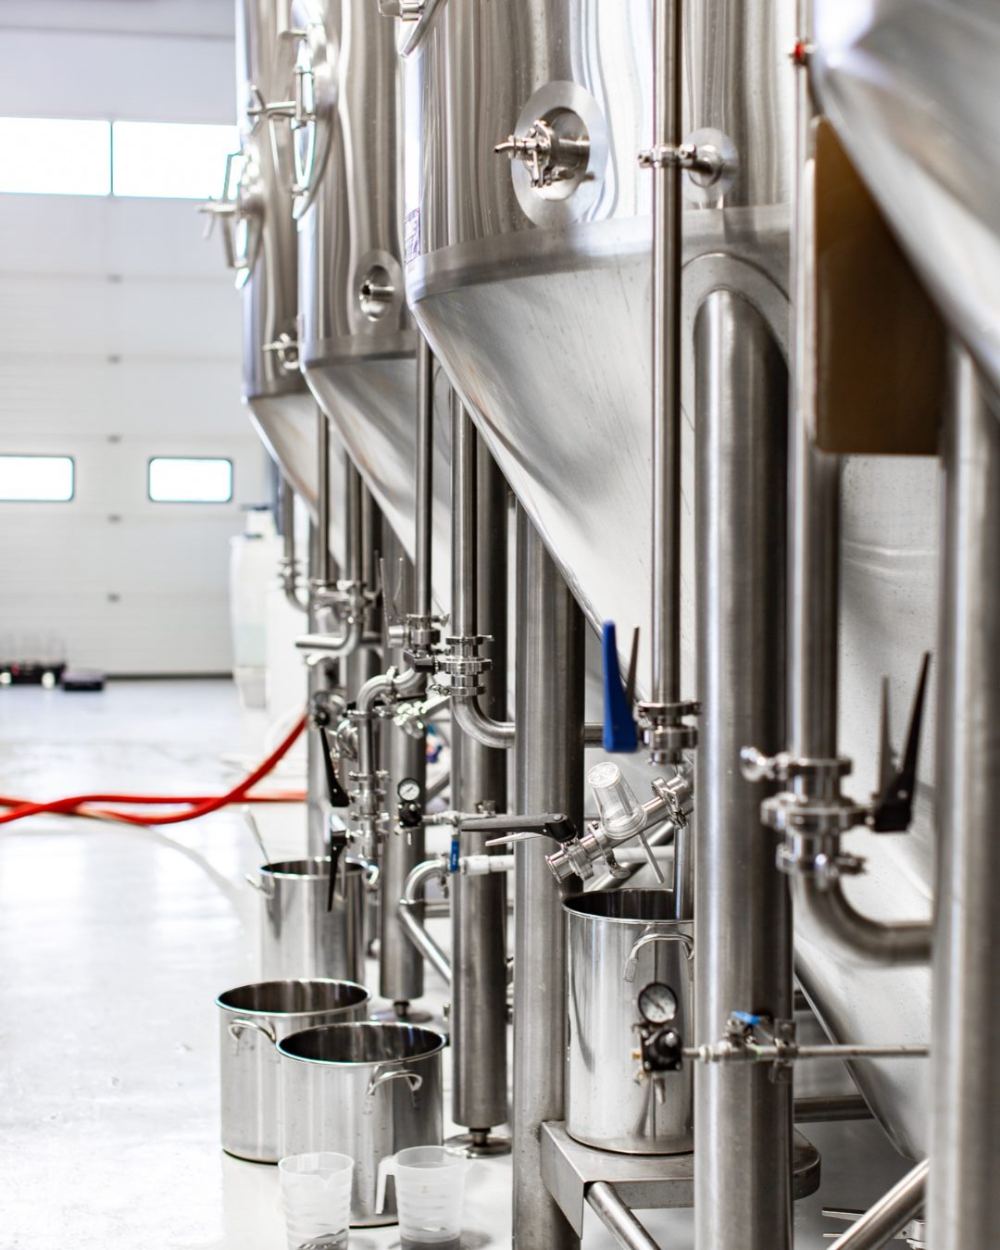 brewery beer brewing equipments,conical stainless steel beer fermenter,commercial brewery equipments for sale,how to start brewery,brewery equipment cost,beer tank,beer bottling machine,automatic brewery system